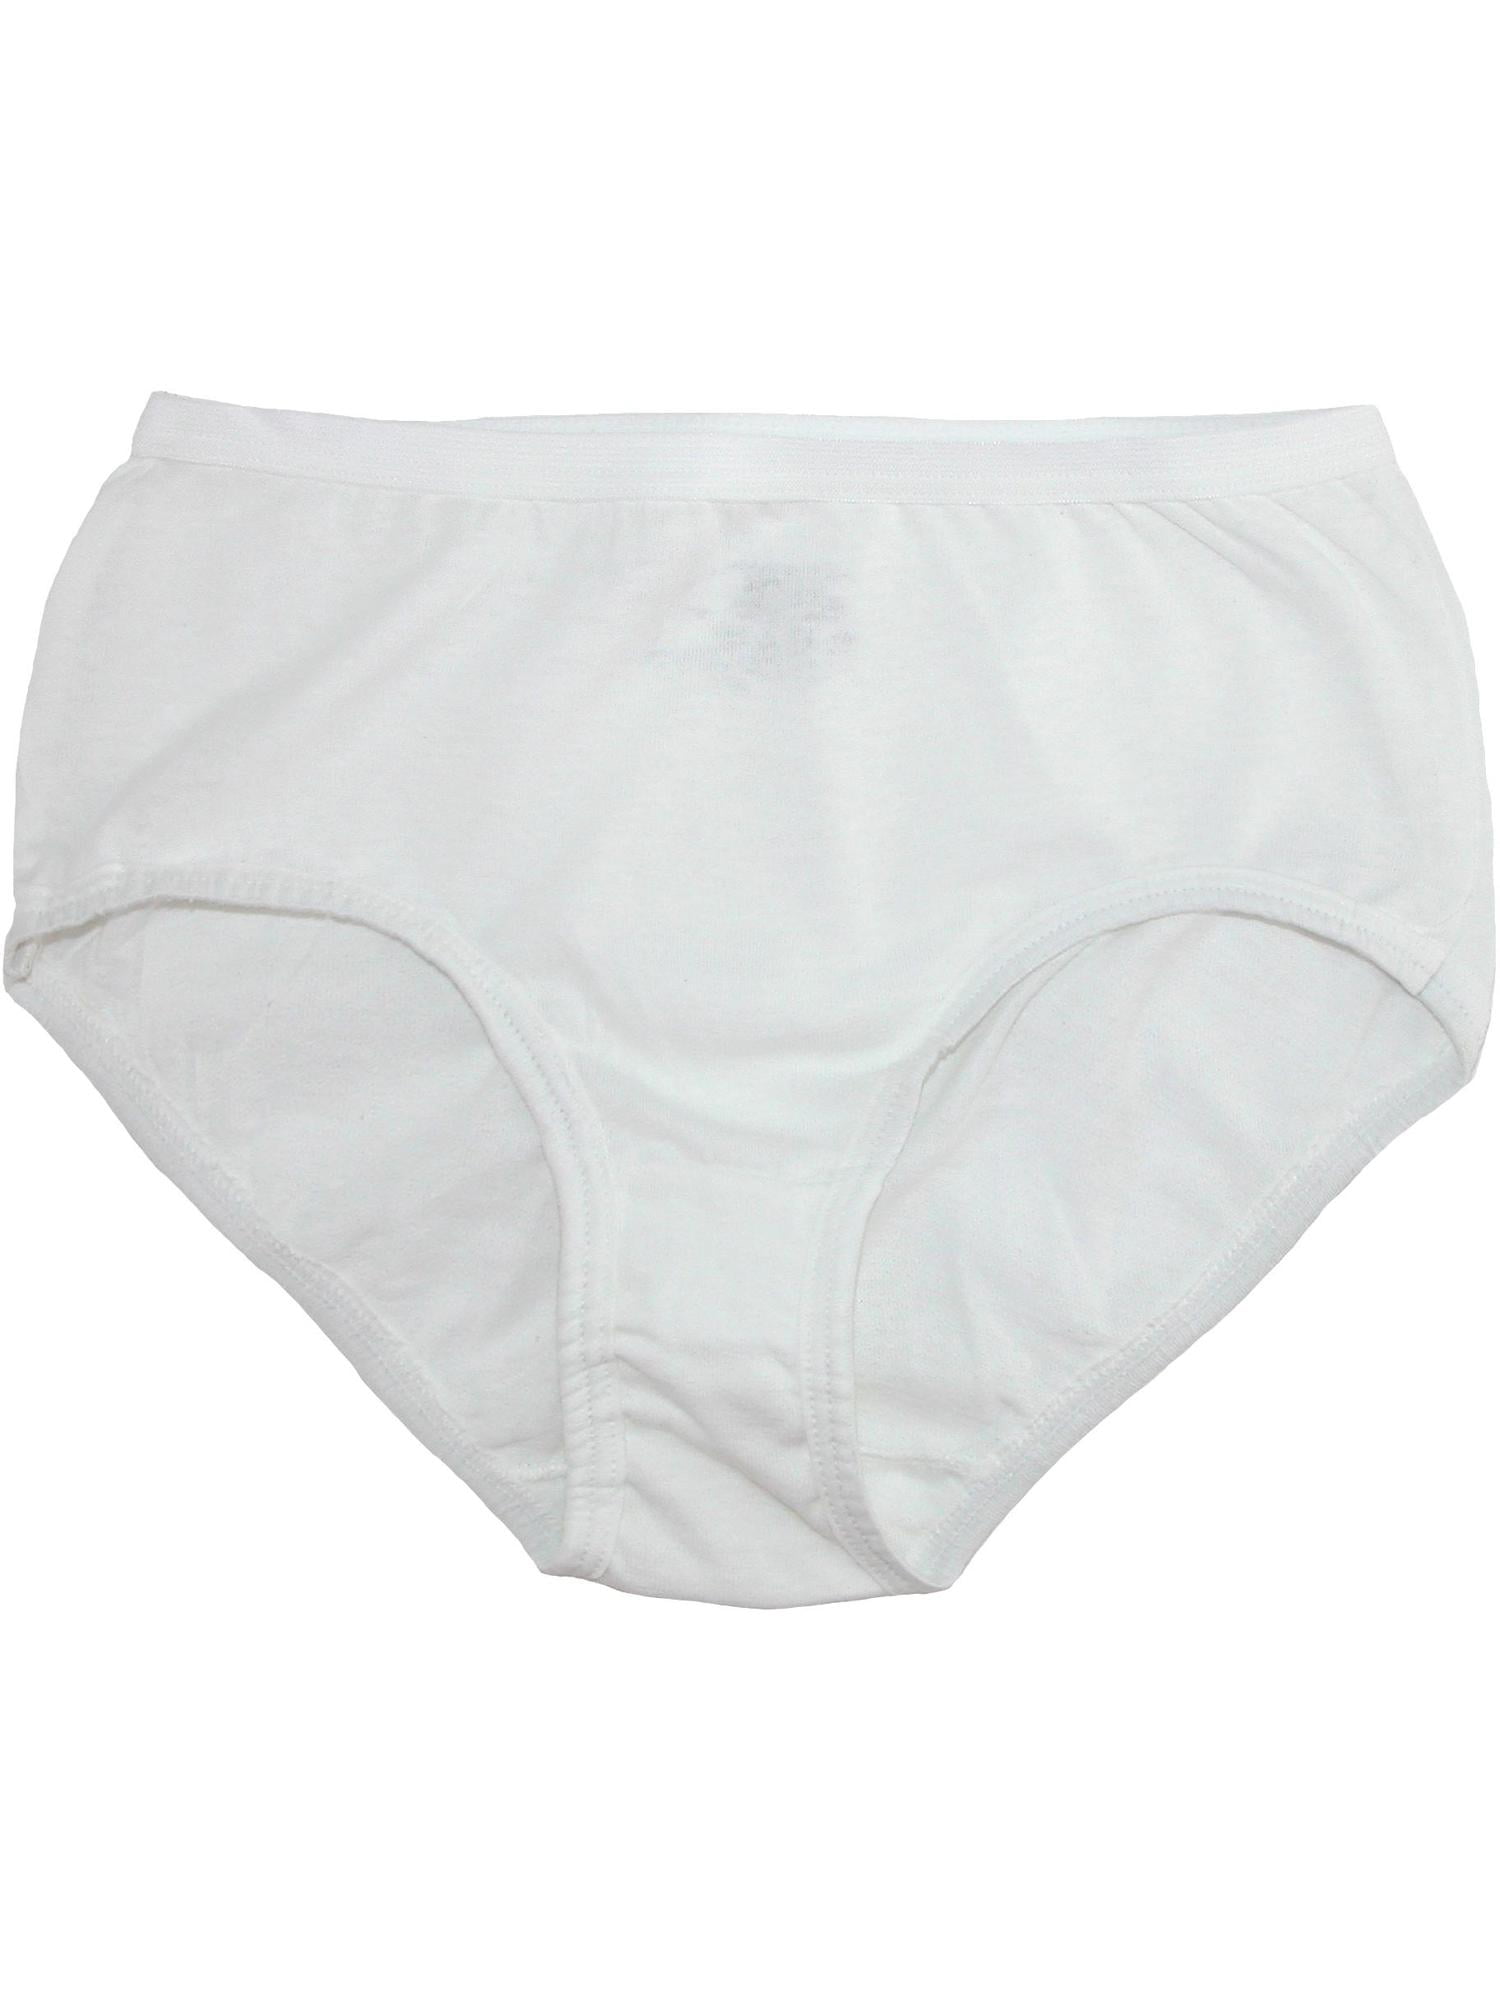 New Back to School Girls 100% Cotton White Comfy Briefs Knickers Pants